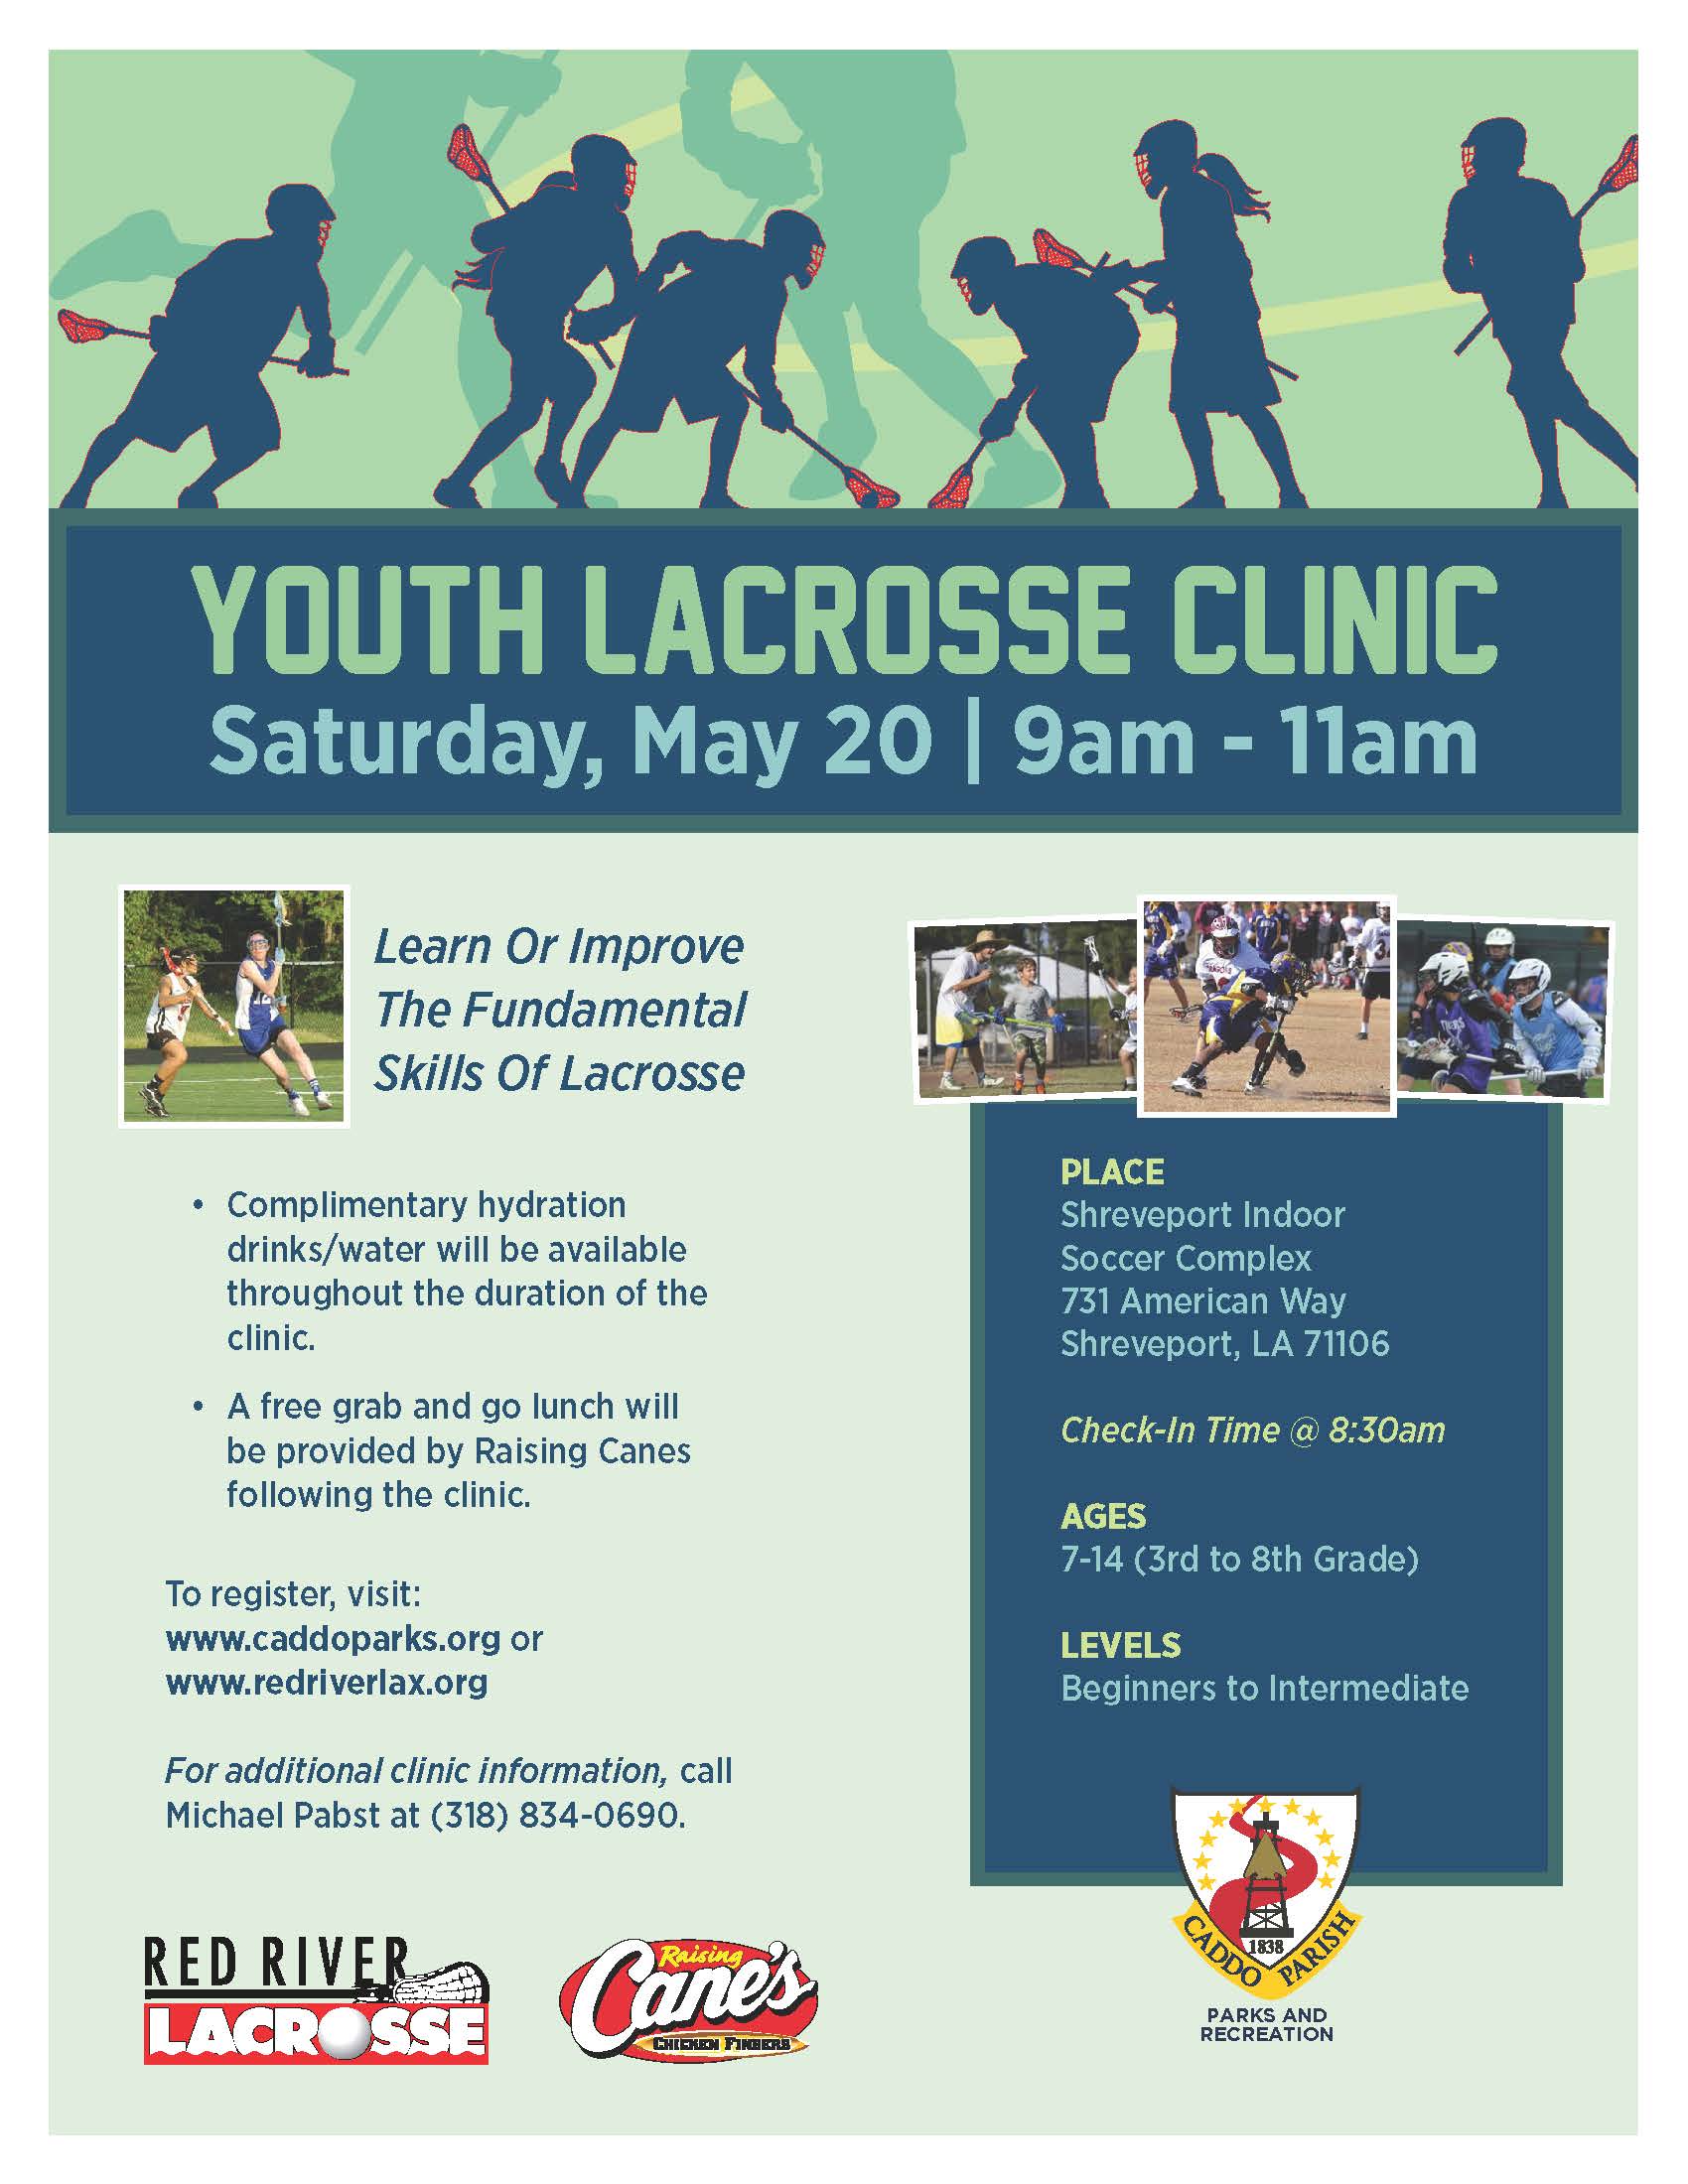 Featured image for “Caddo Parish Parks and Recreation & Red River Lacrosse Association to Host Youth Lacrosse Clinic”